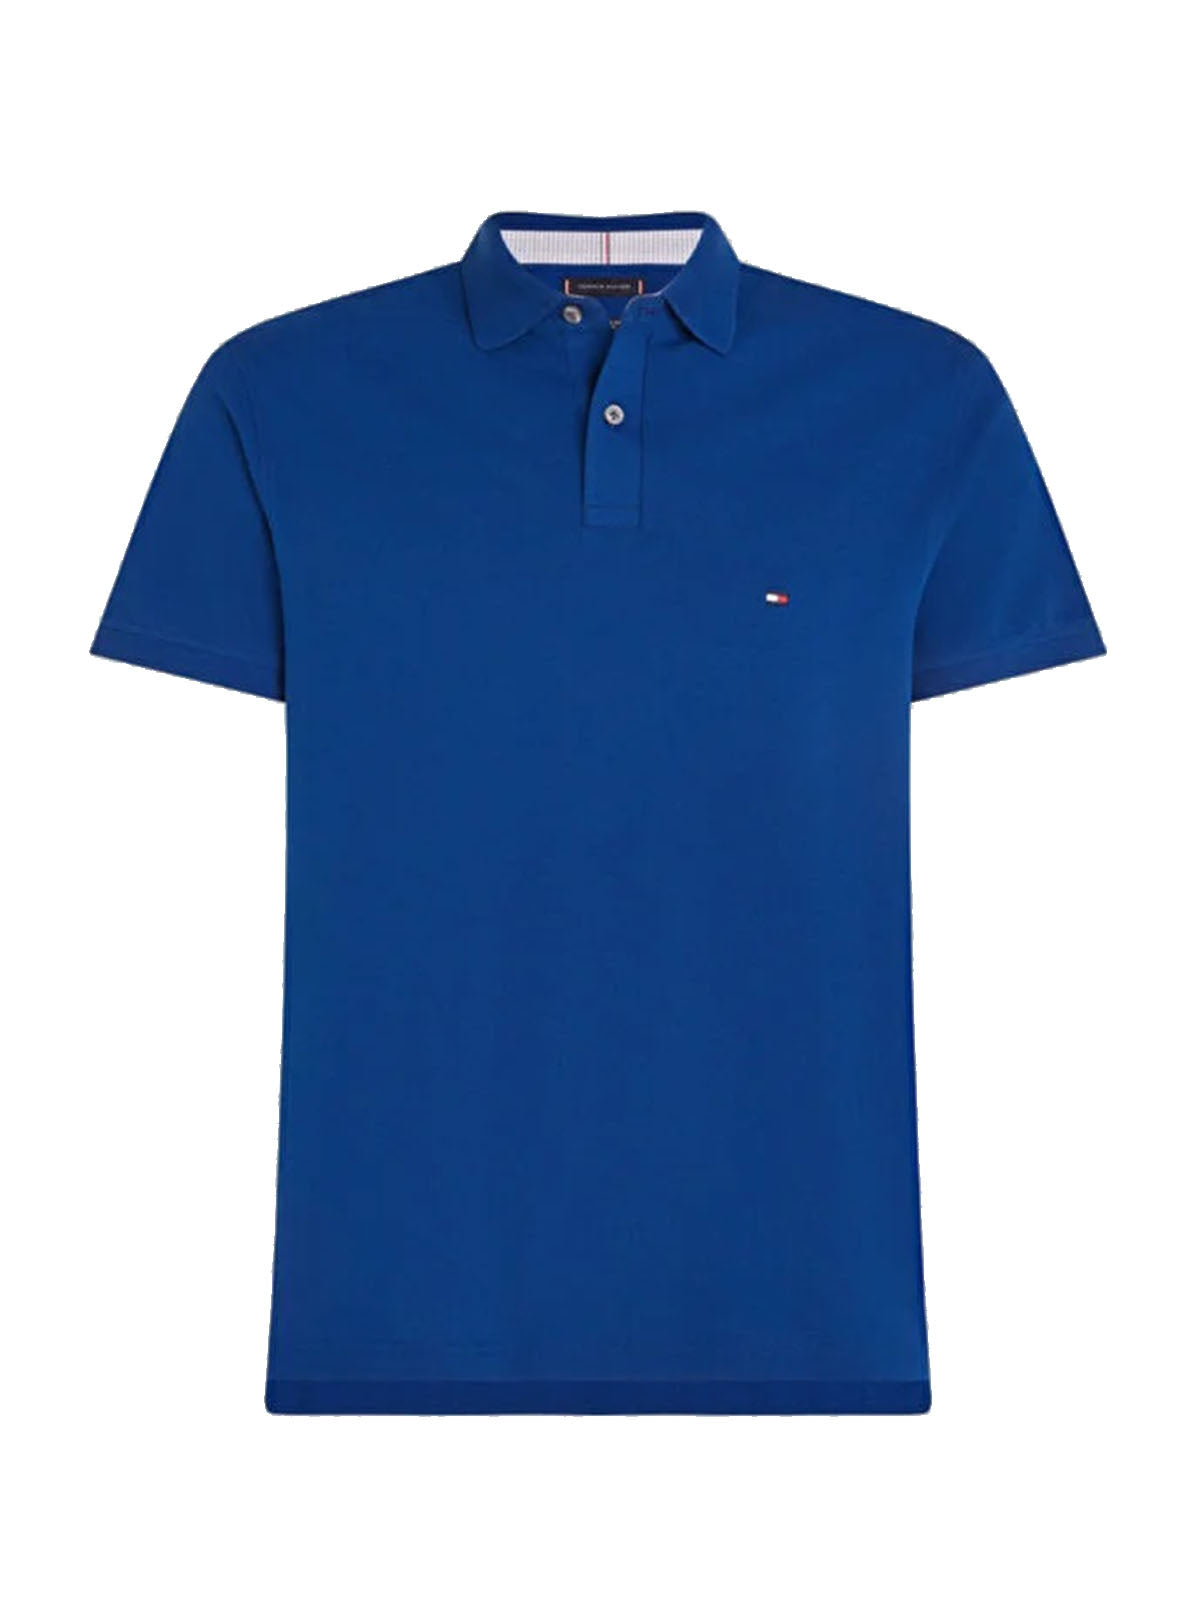 Polo Uomo Tommy Hilfiger - Polo 1985 Collection Regular Fit - Blu